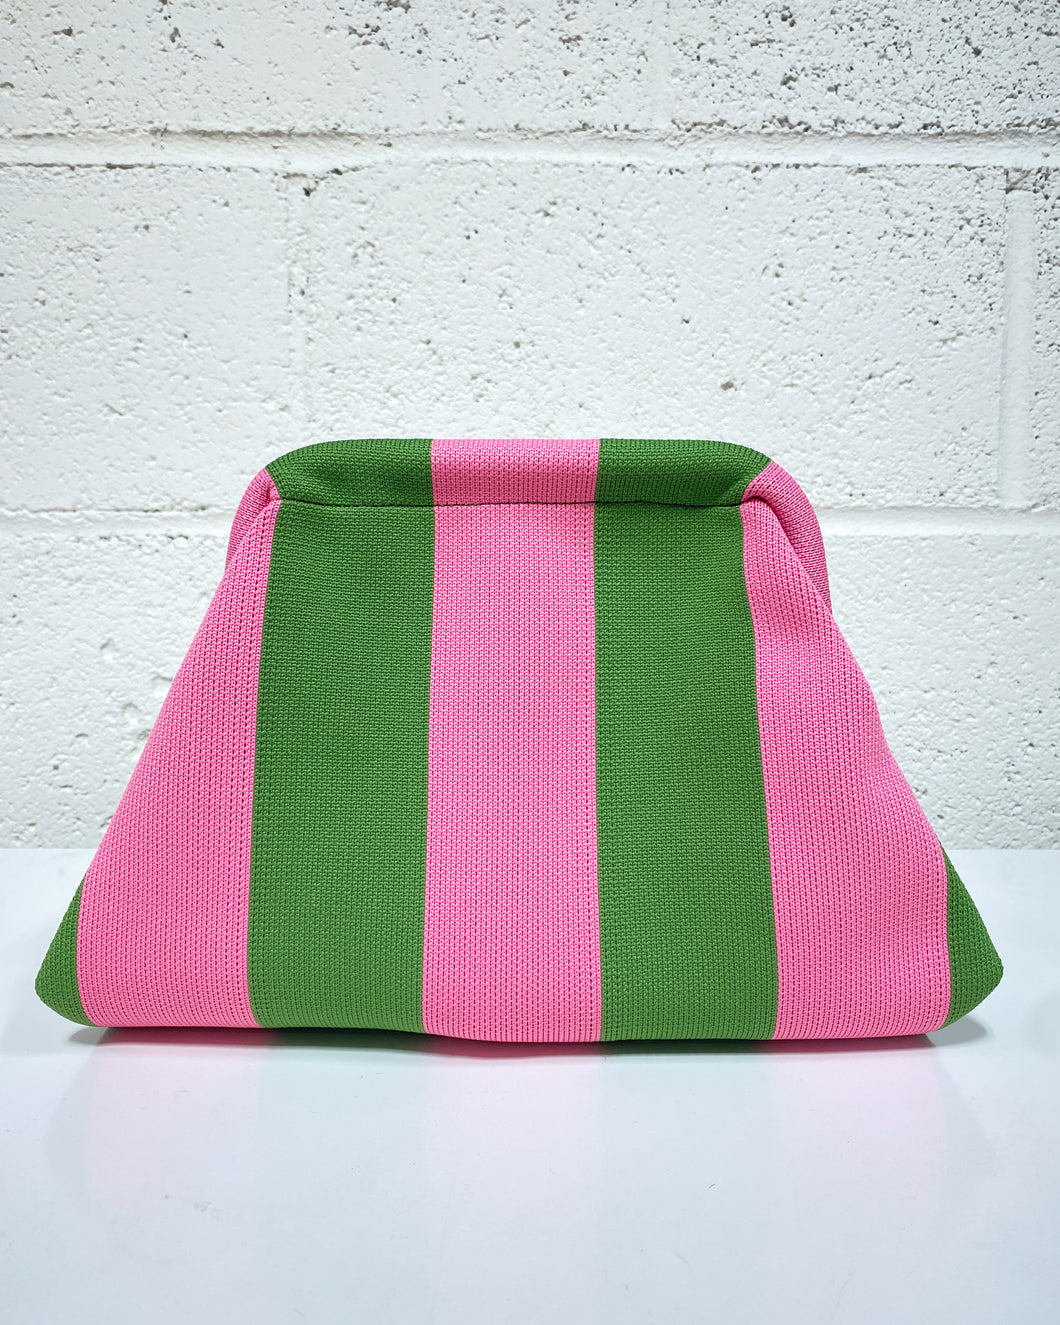 Pink and Green Striped Clutch